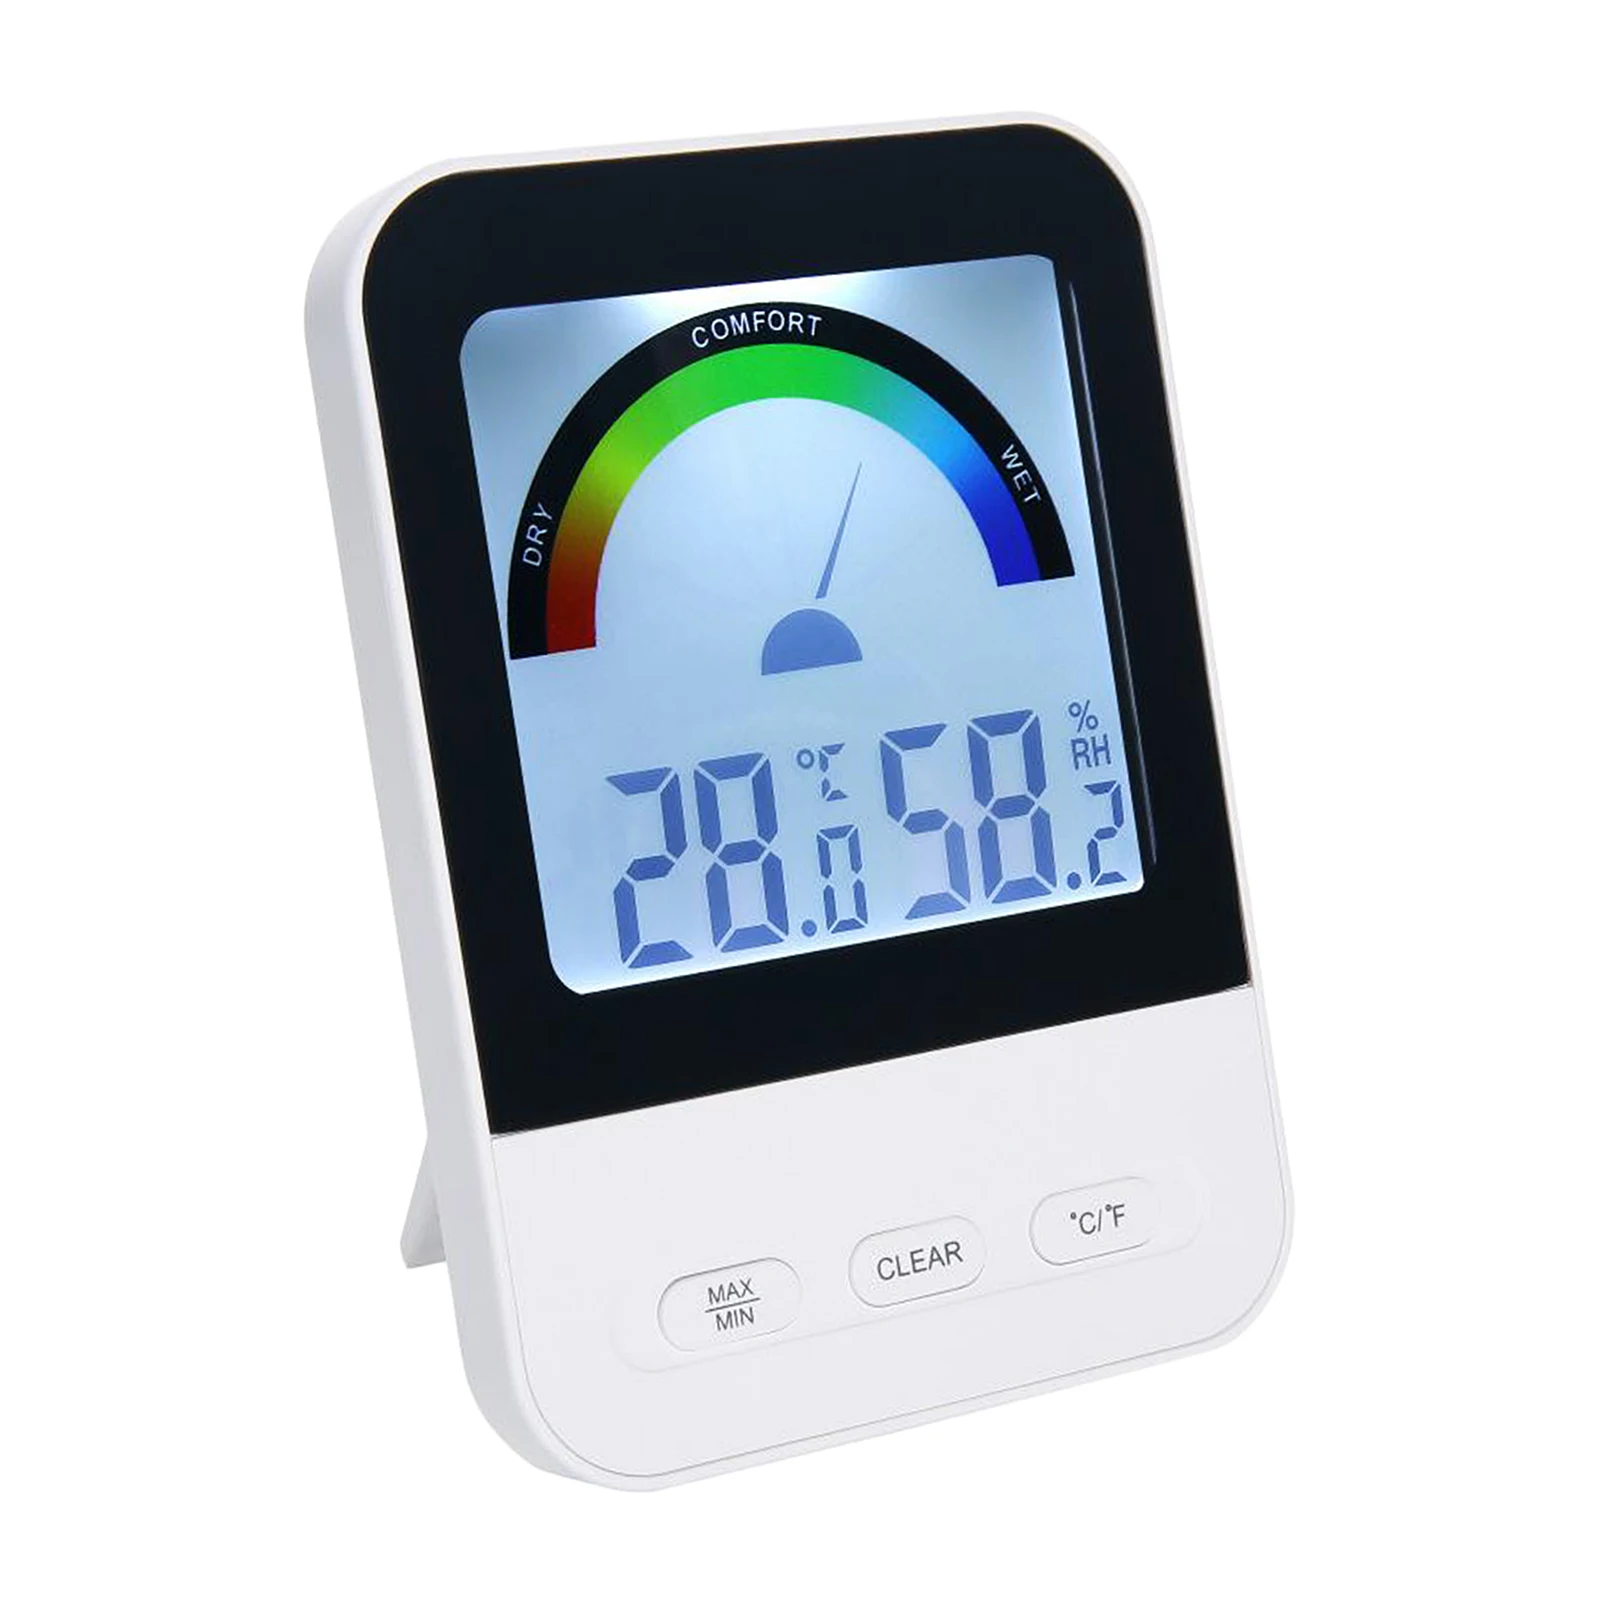 Mini LCD Indoor Thermometer Hygrometer Home Temperature Humidity Monitor